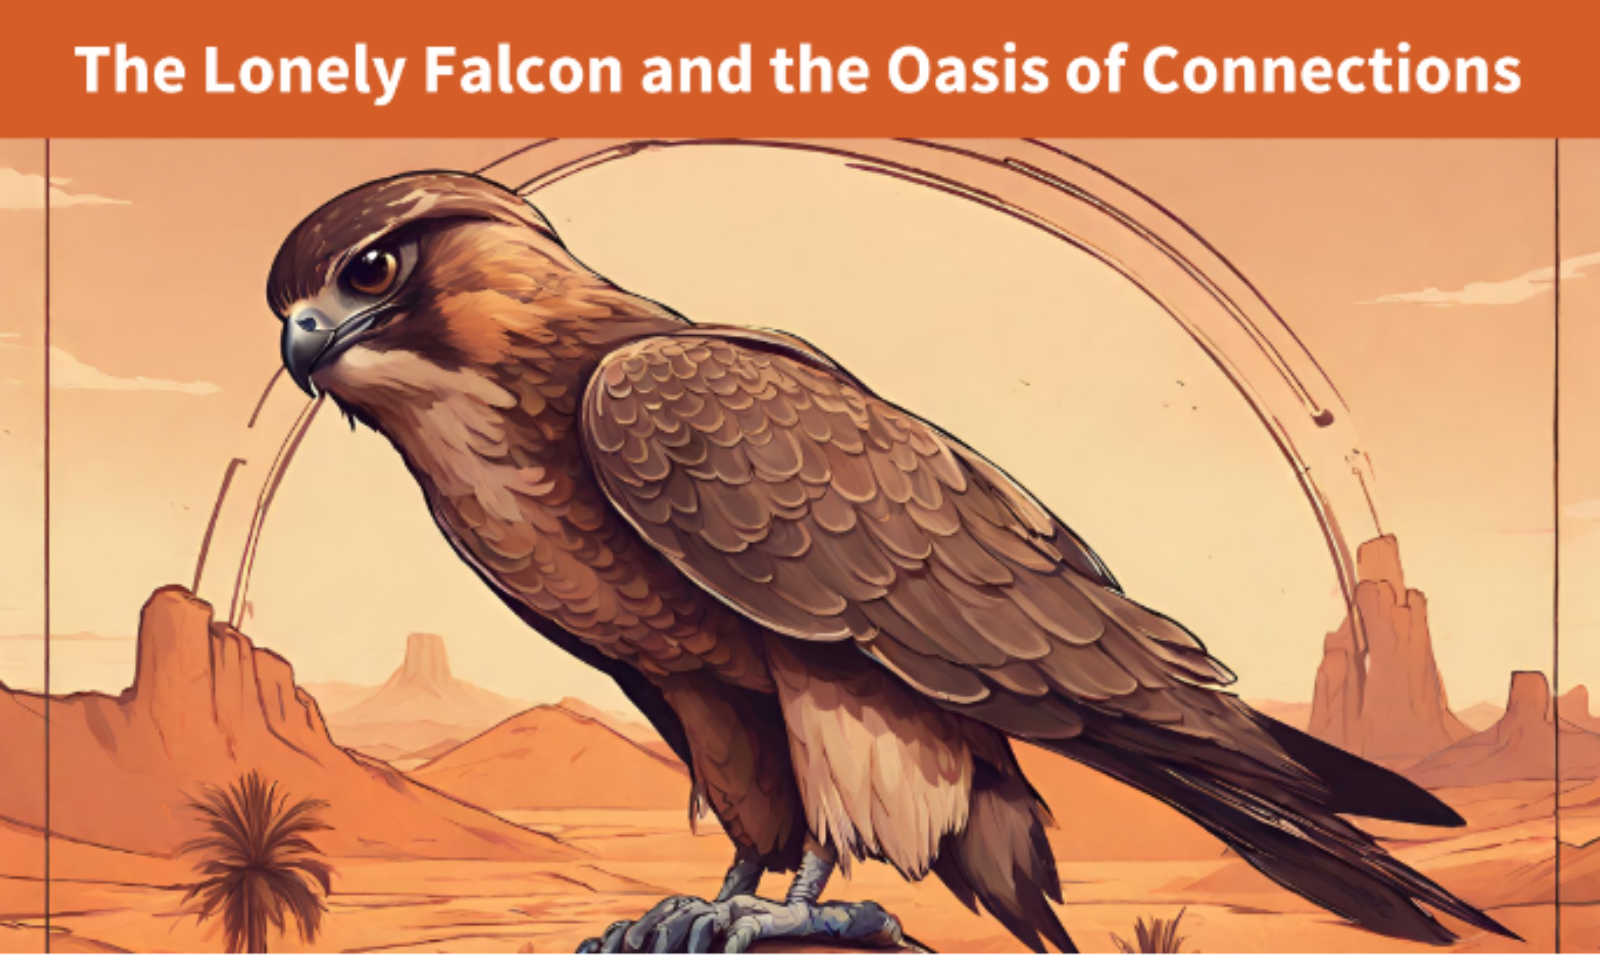 The Lonely Falcon and the Oasis of Connections